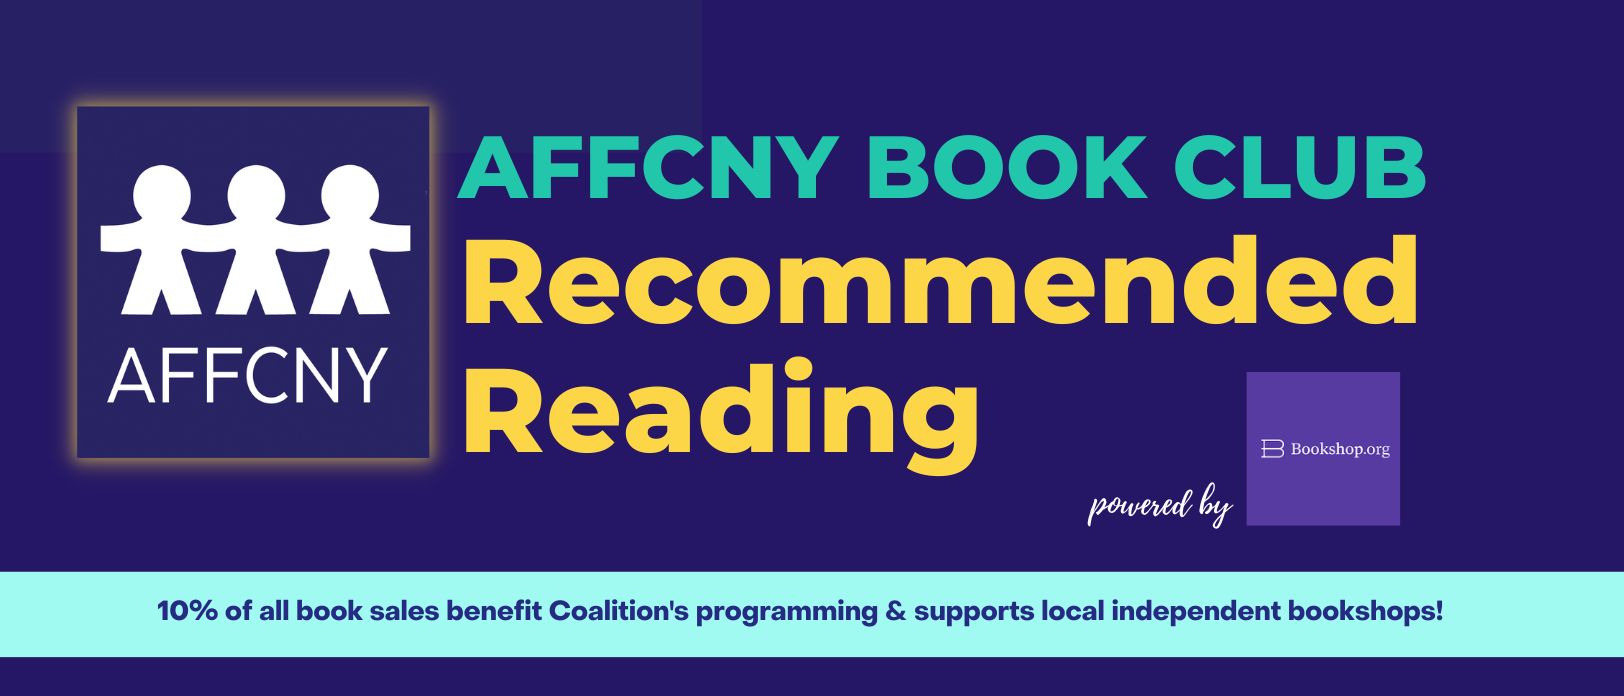 AFFCNY recommended reading list on bookshop